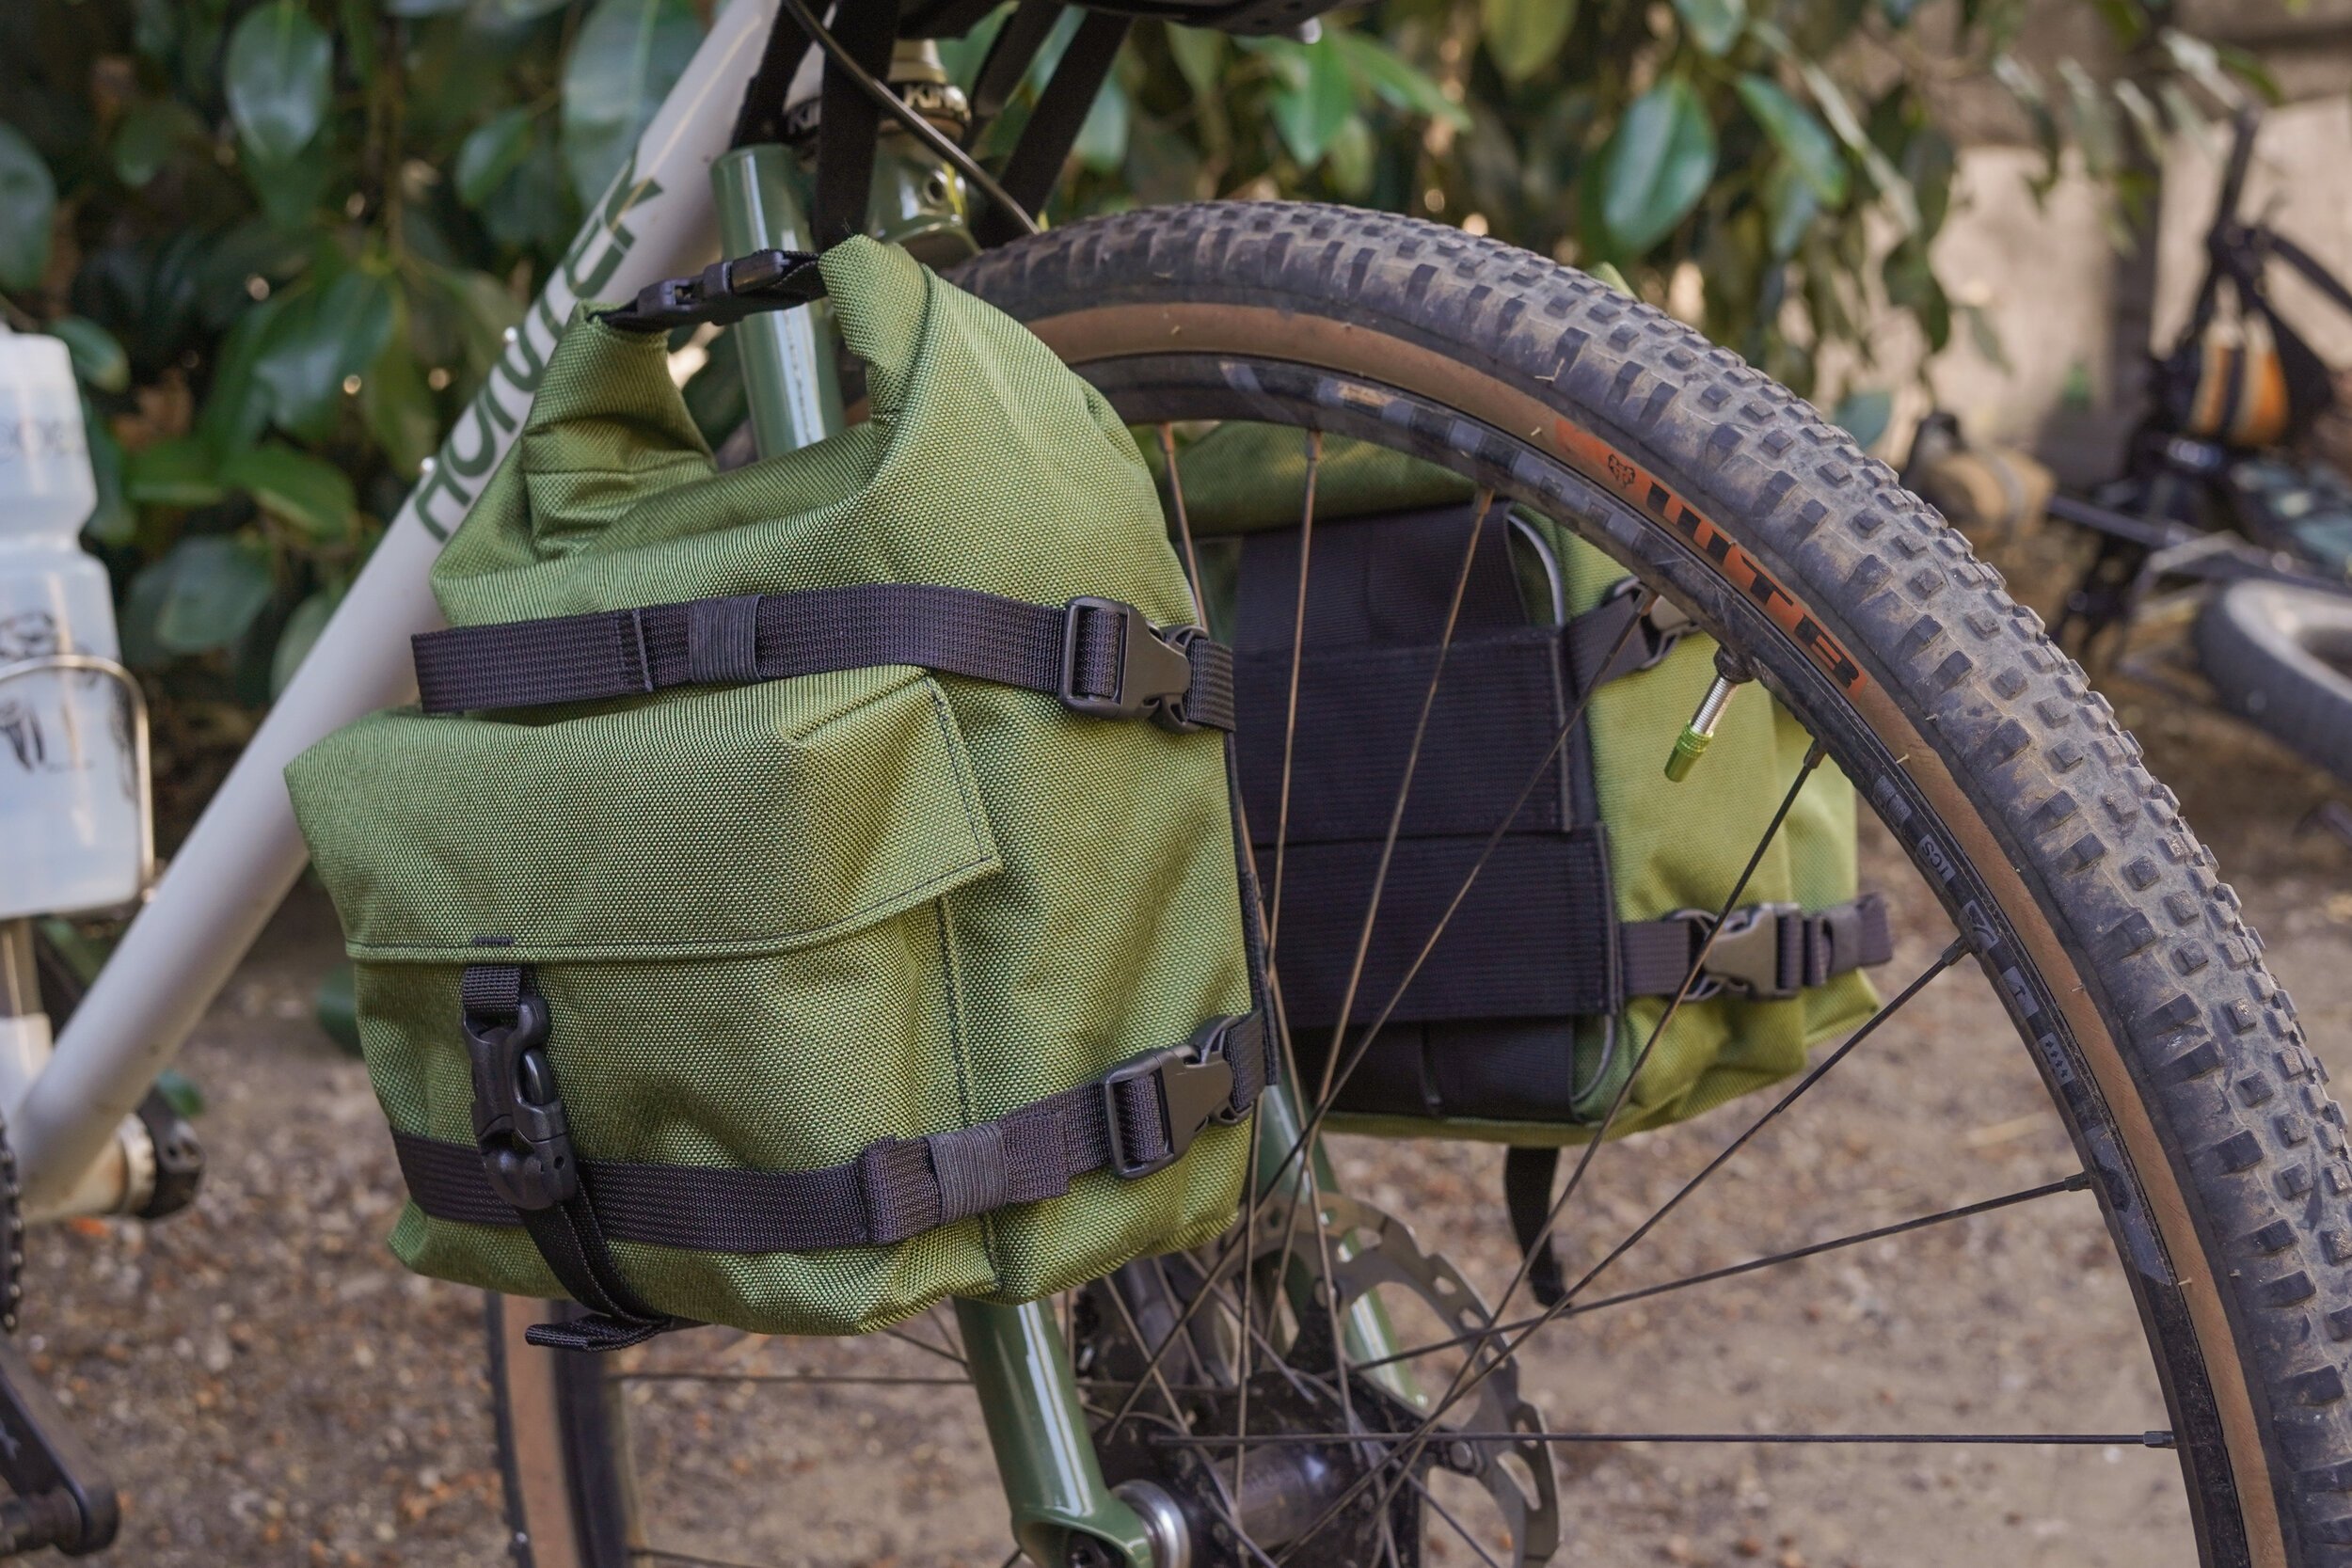 Pico Panniers Small Touring Panniers - Outer Shell Bike Bags